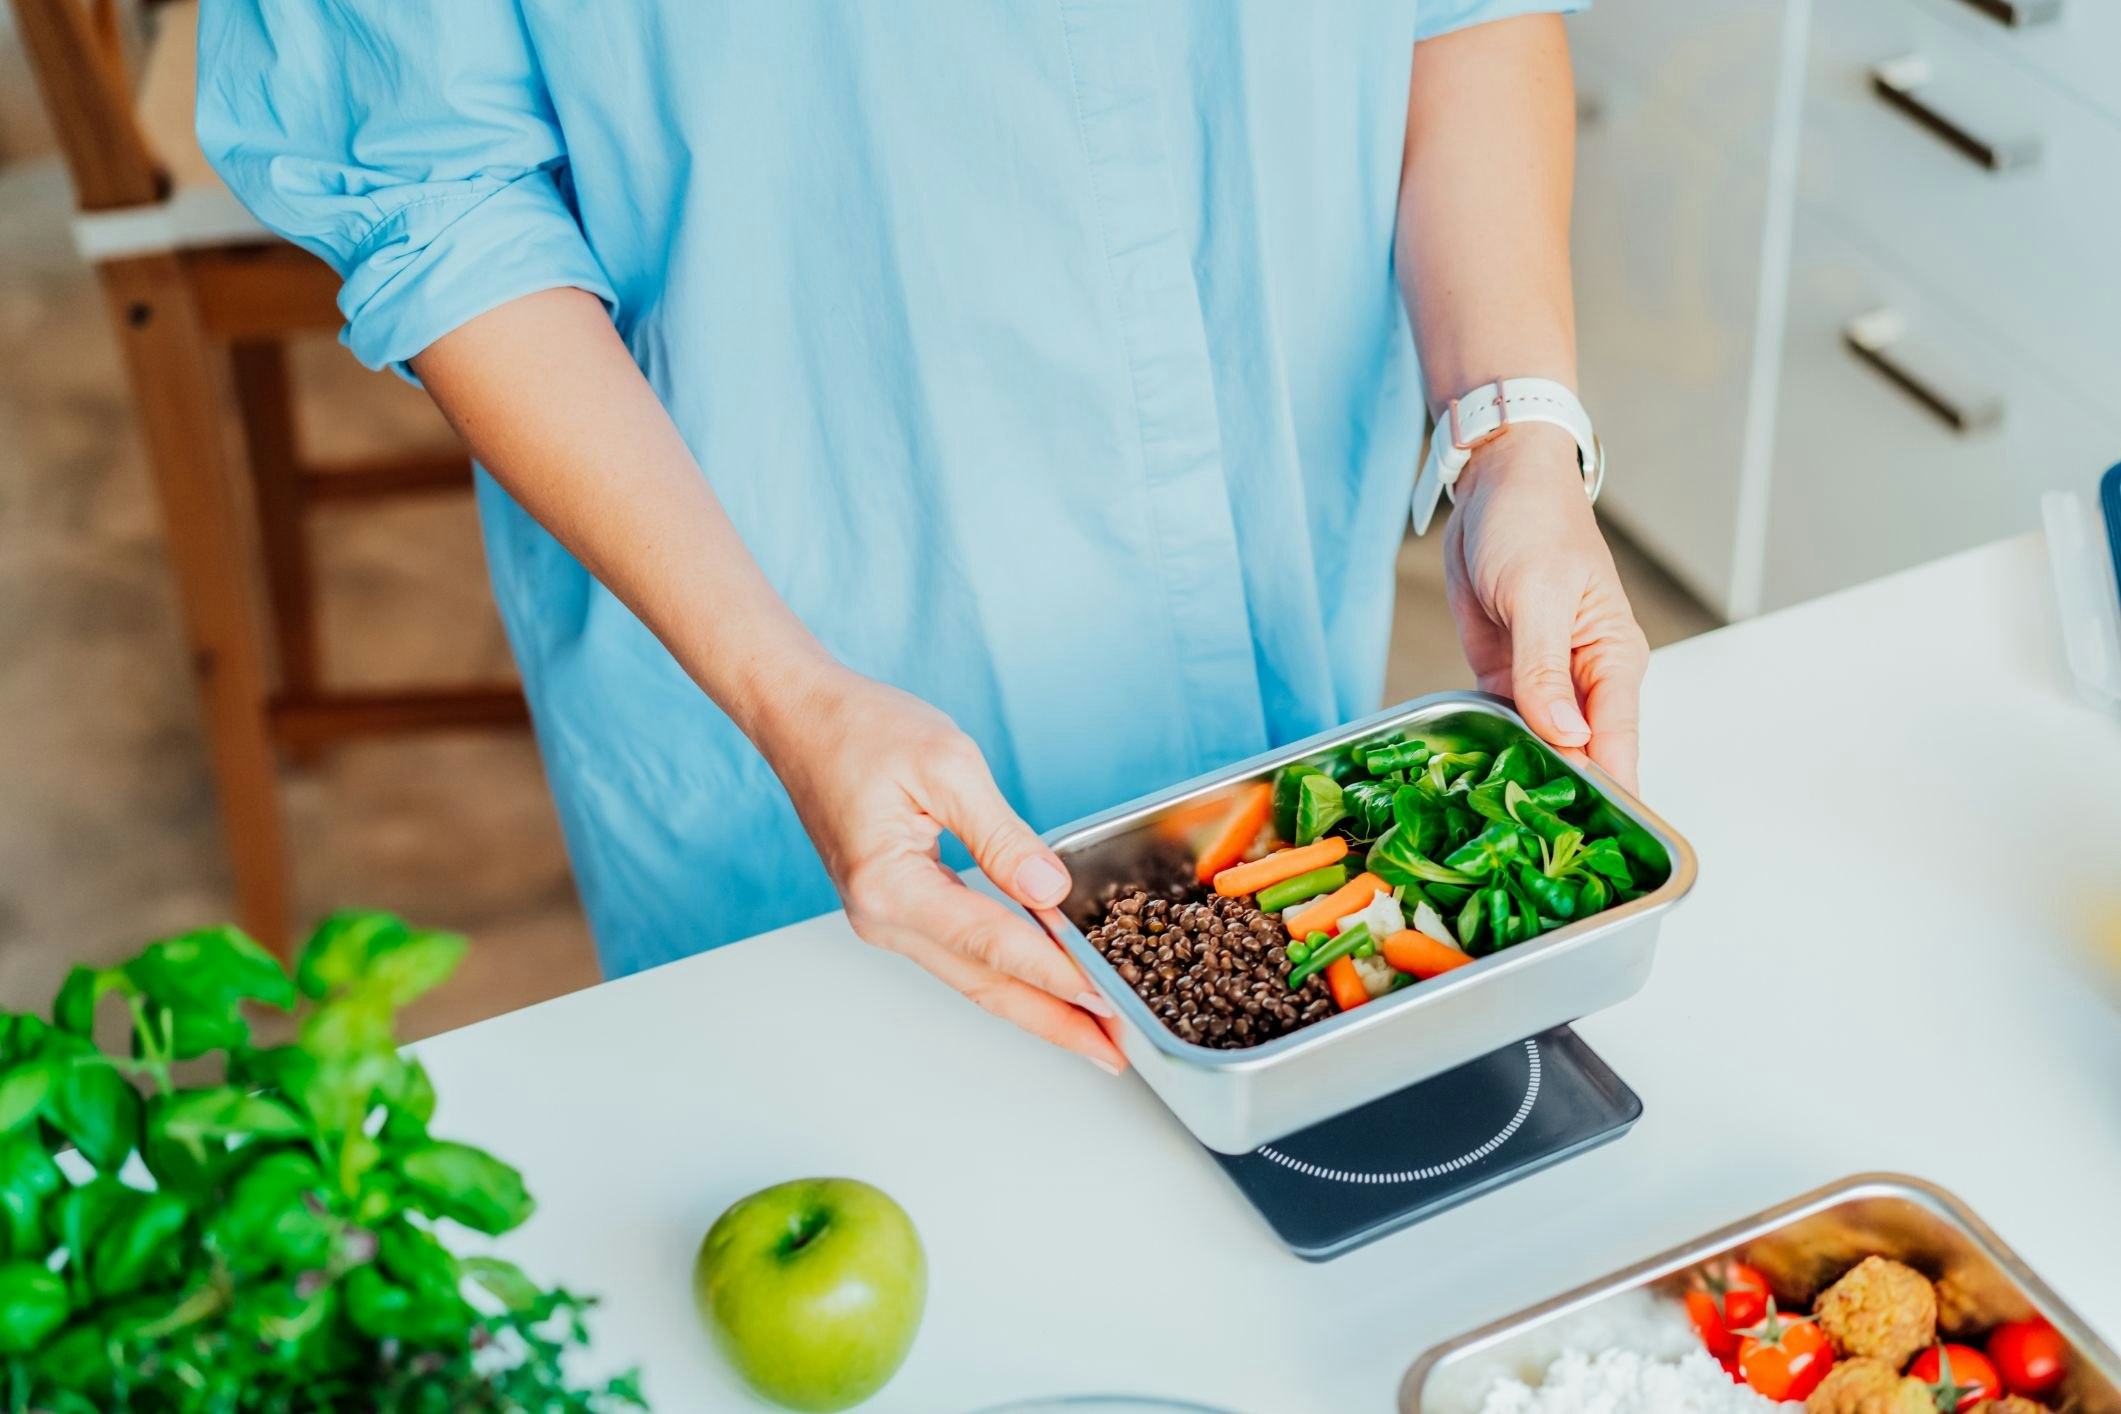 Meal prepping can seem overwhelming when you’re struggling with mental health issues, but there are techniques to navigate this. [Source: Shutterstock]
